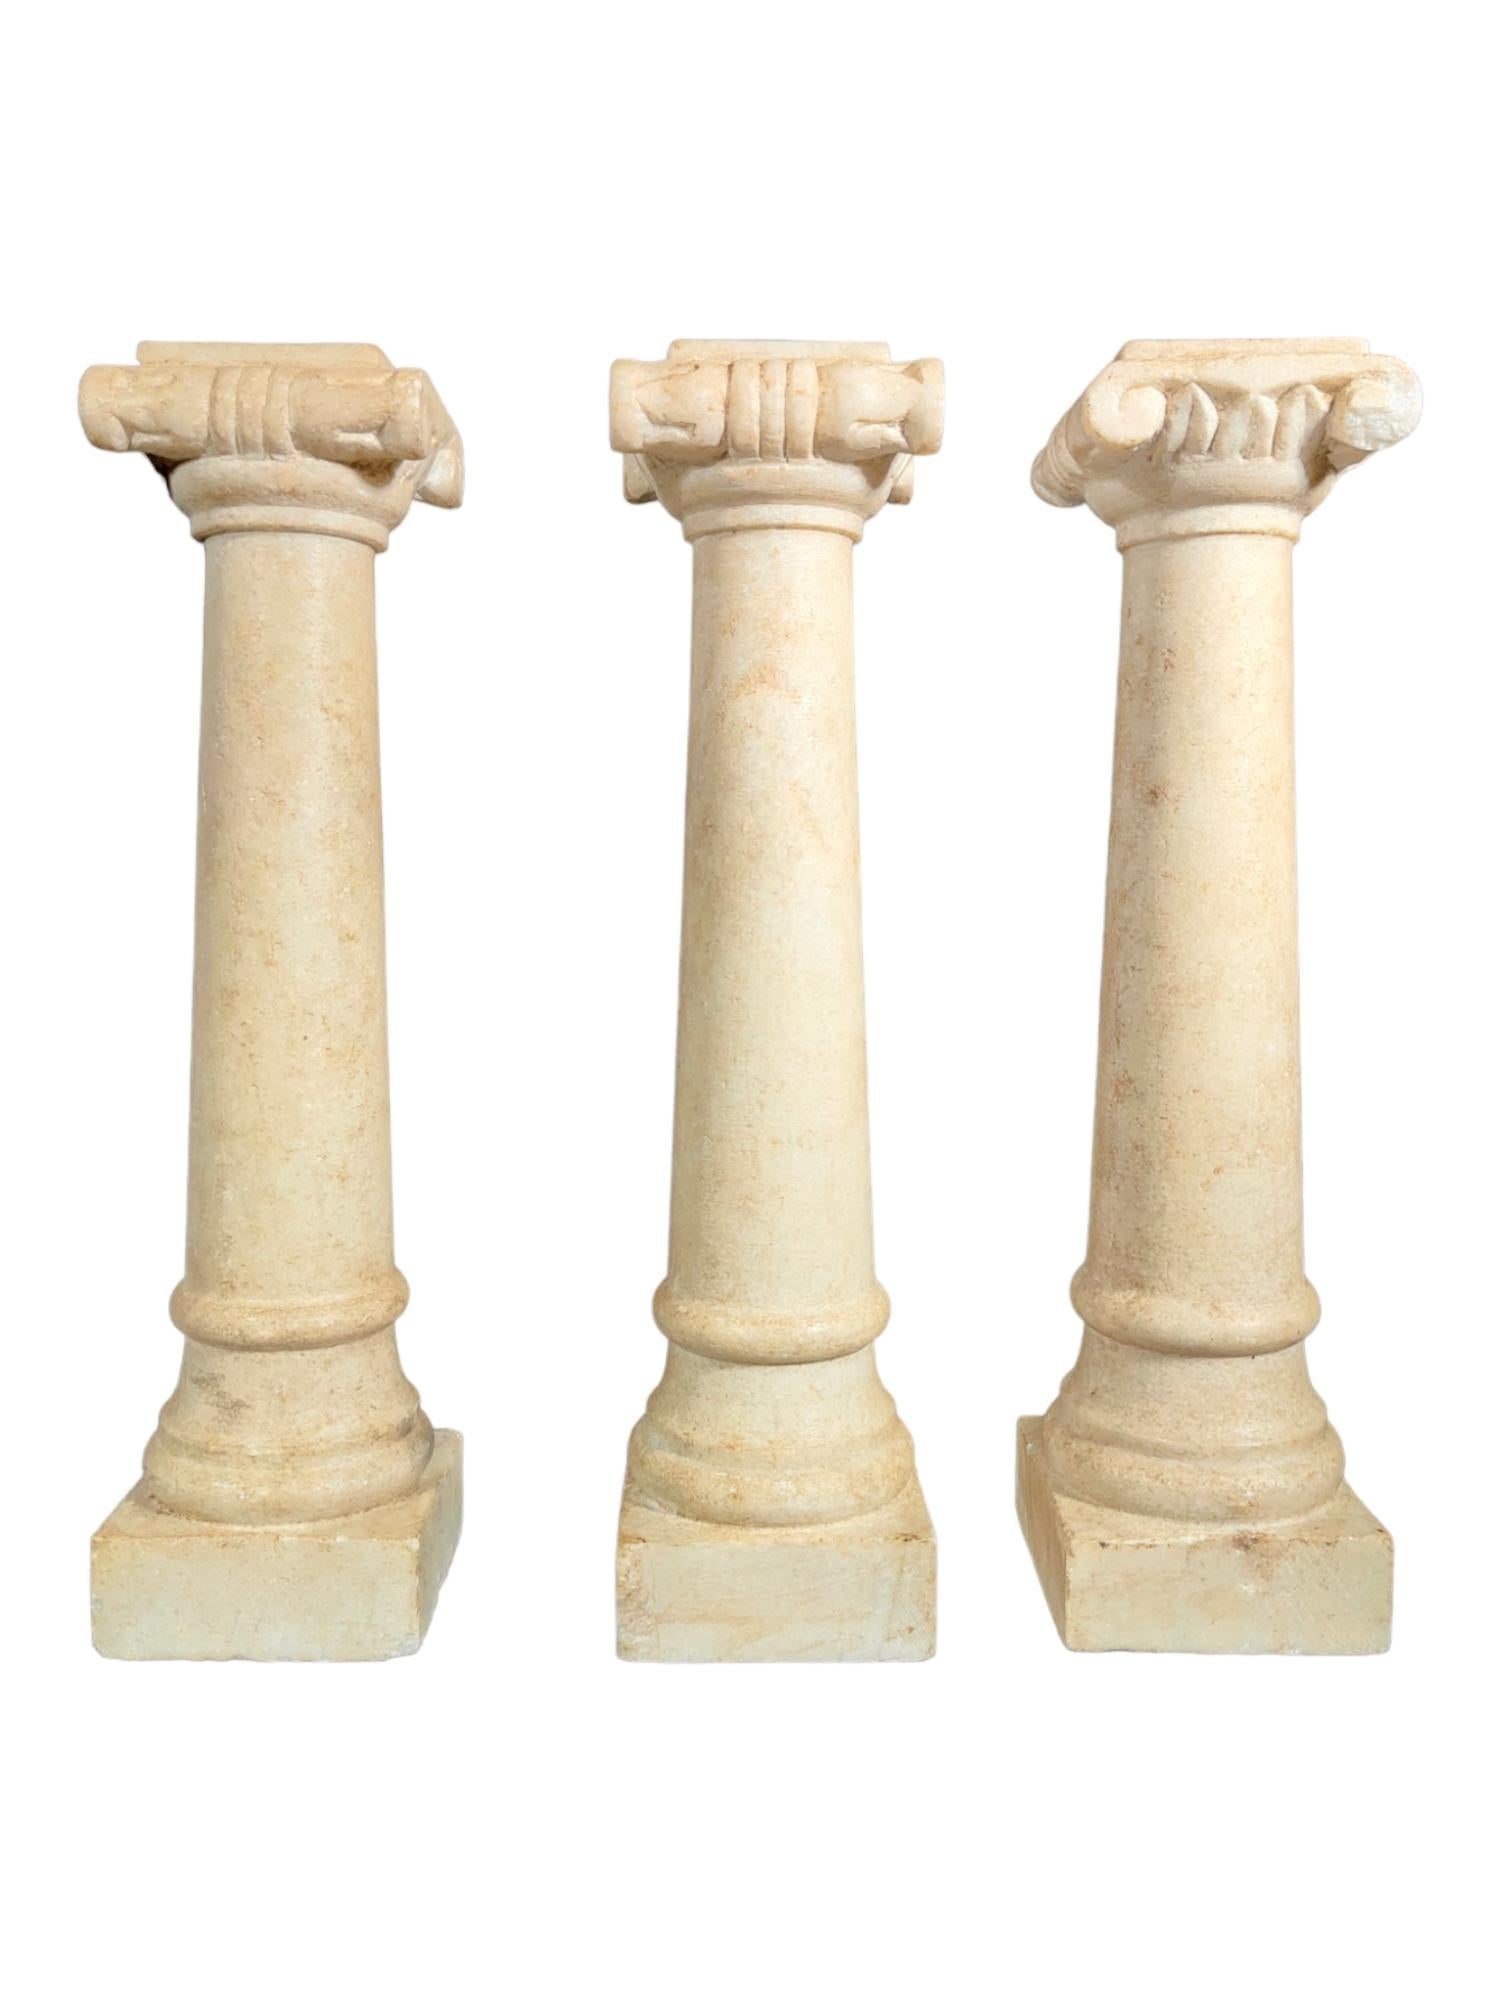 Three marble columns from the 19th century, in good condition.
Dimensions: 32 cm high.
Features and Details:
These three marble columns are exquisite examples of 19th-century craftsmanship. With a height of 32 cm each, they exude elegance and